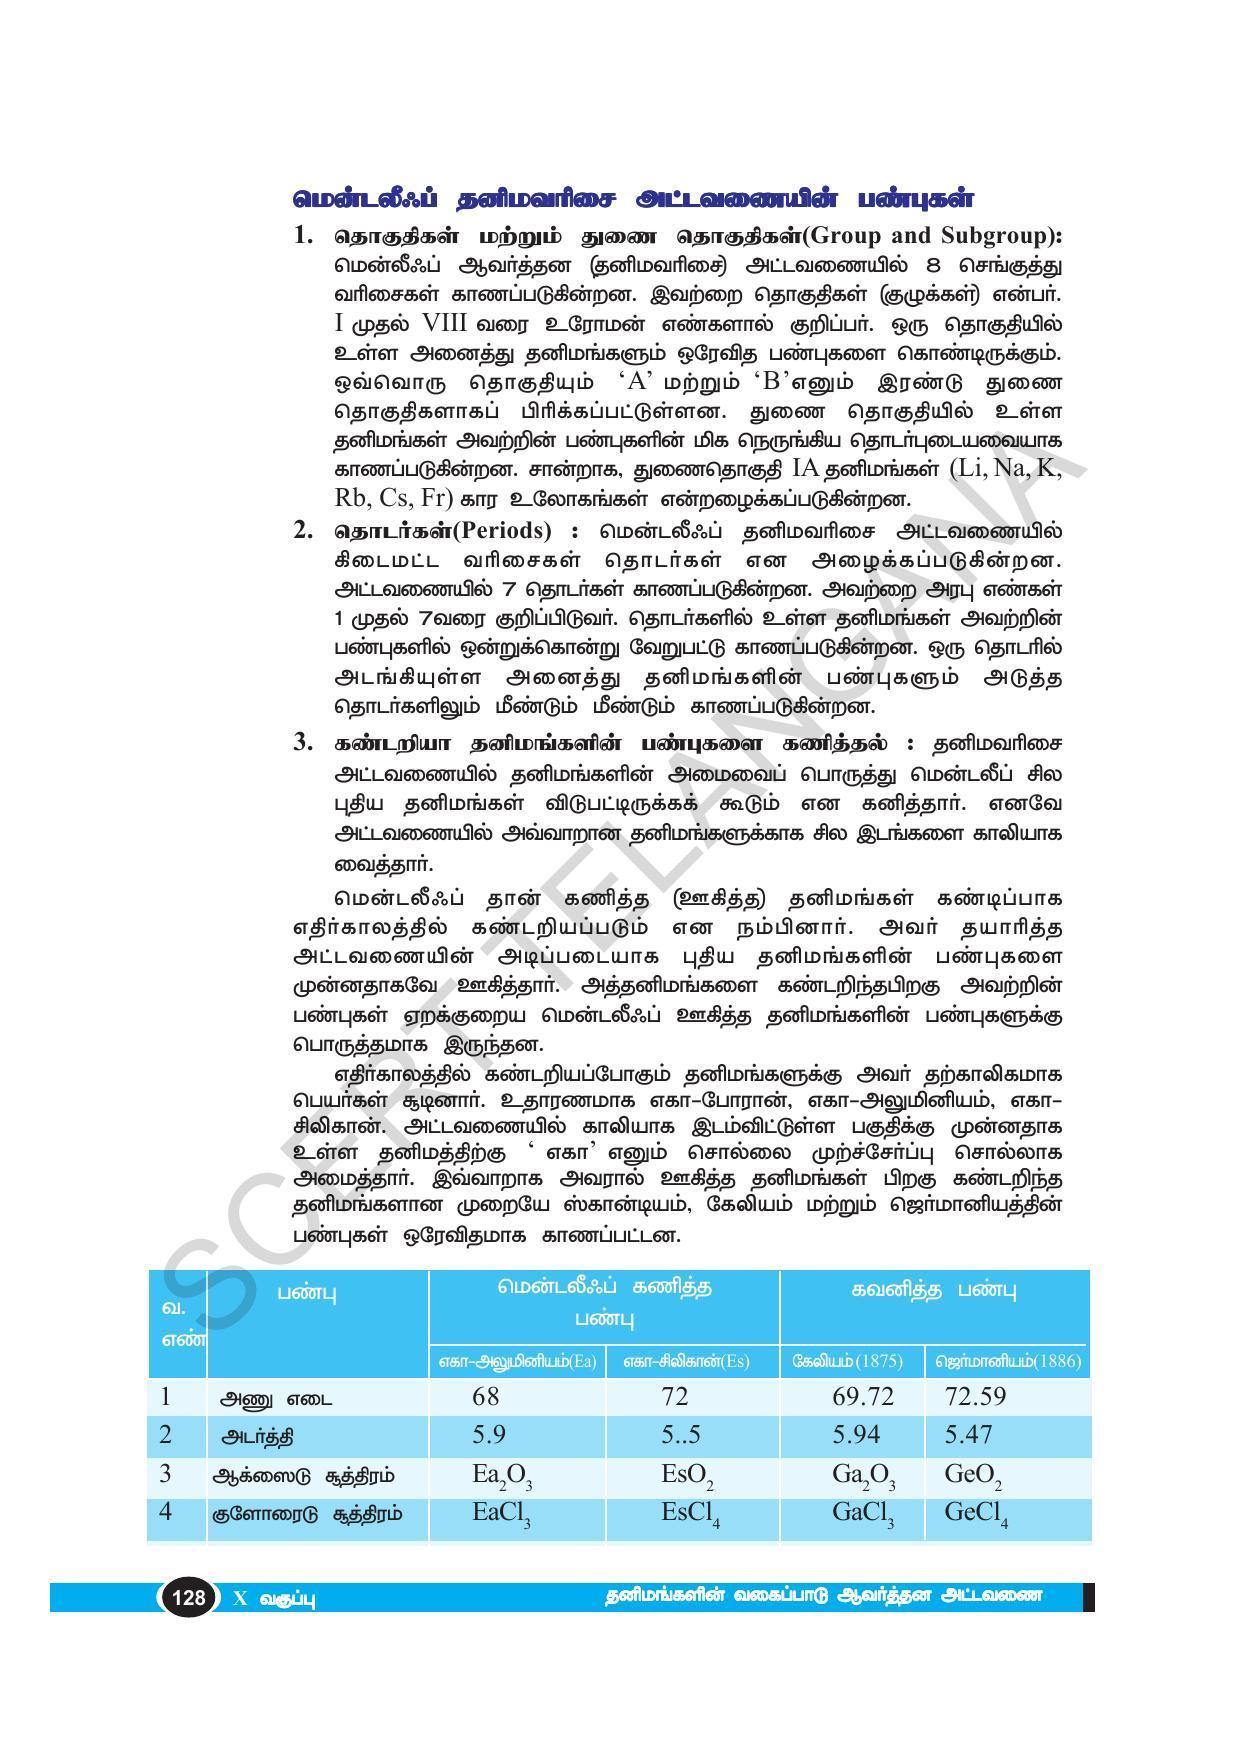 TS SCERT Class 10 Physical Science(Tamil Medium) Text Book - Page 140